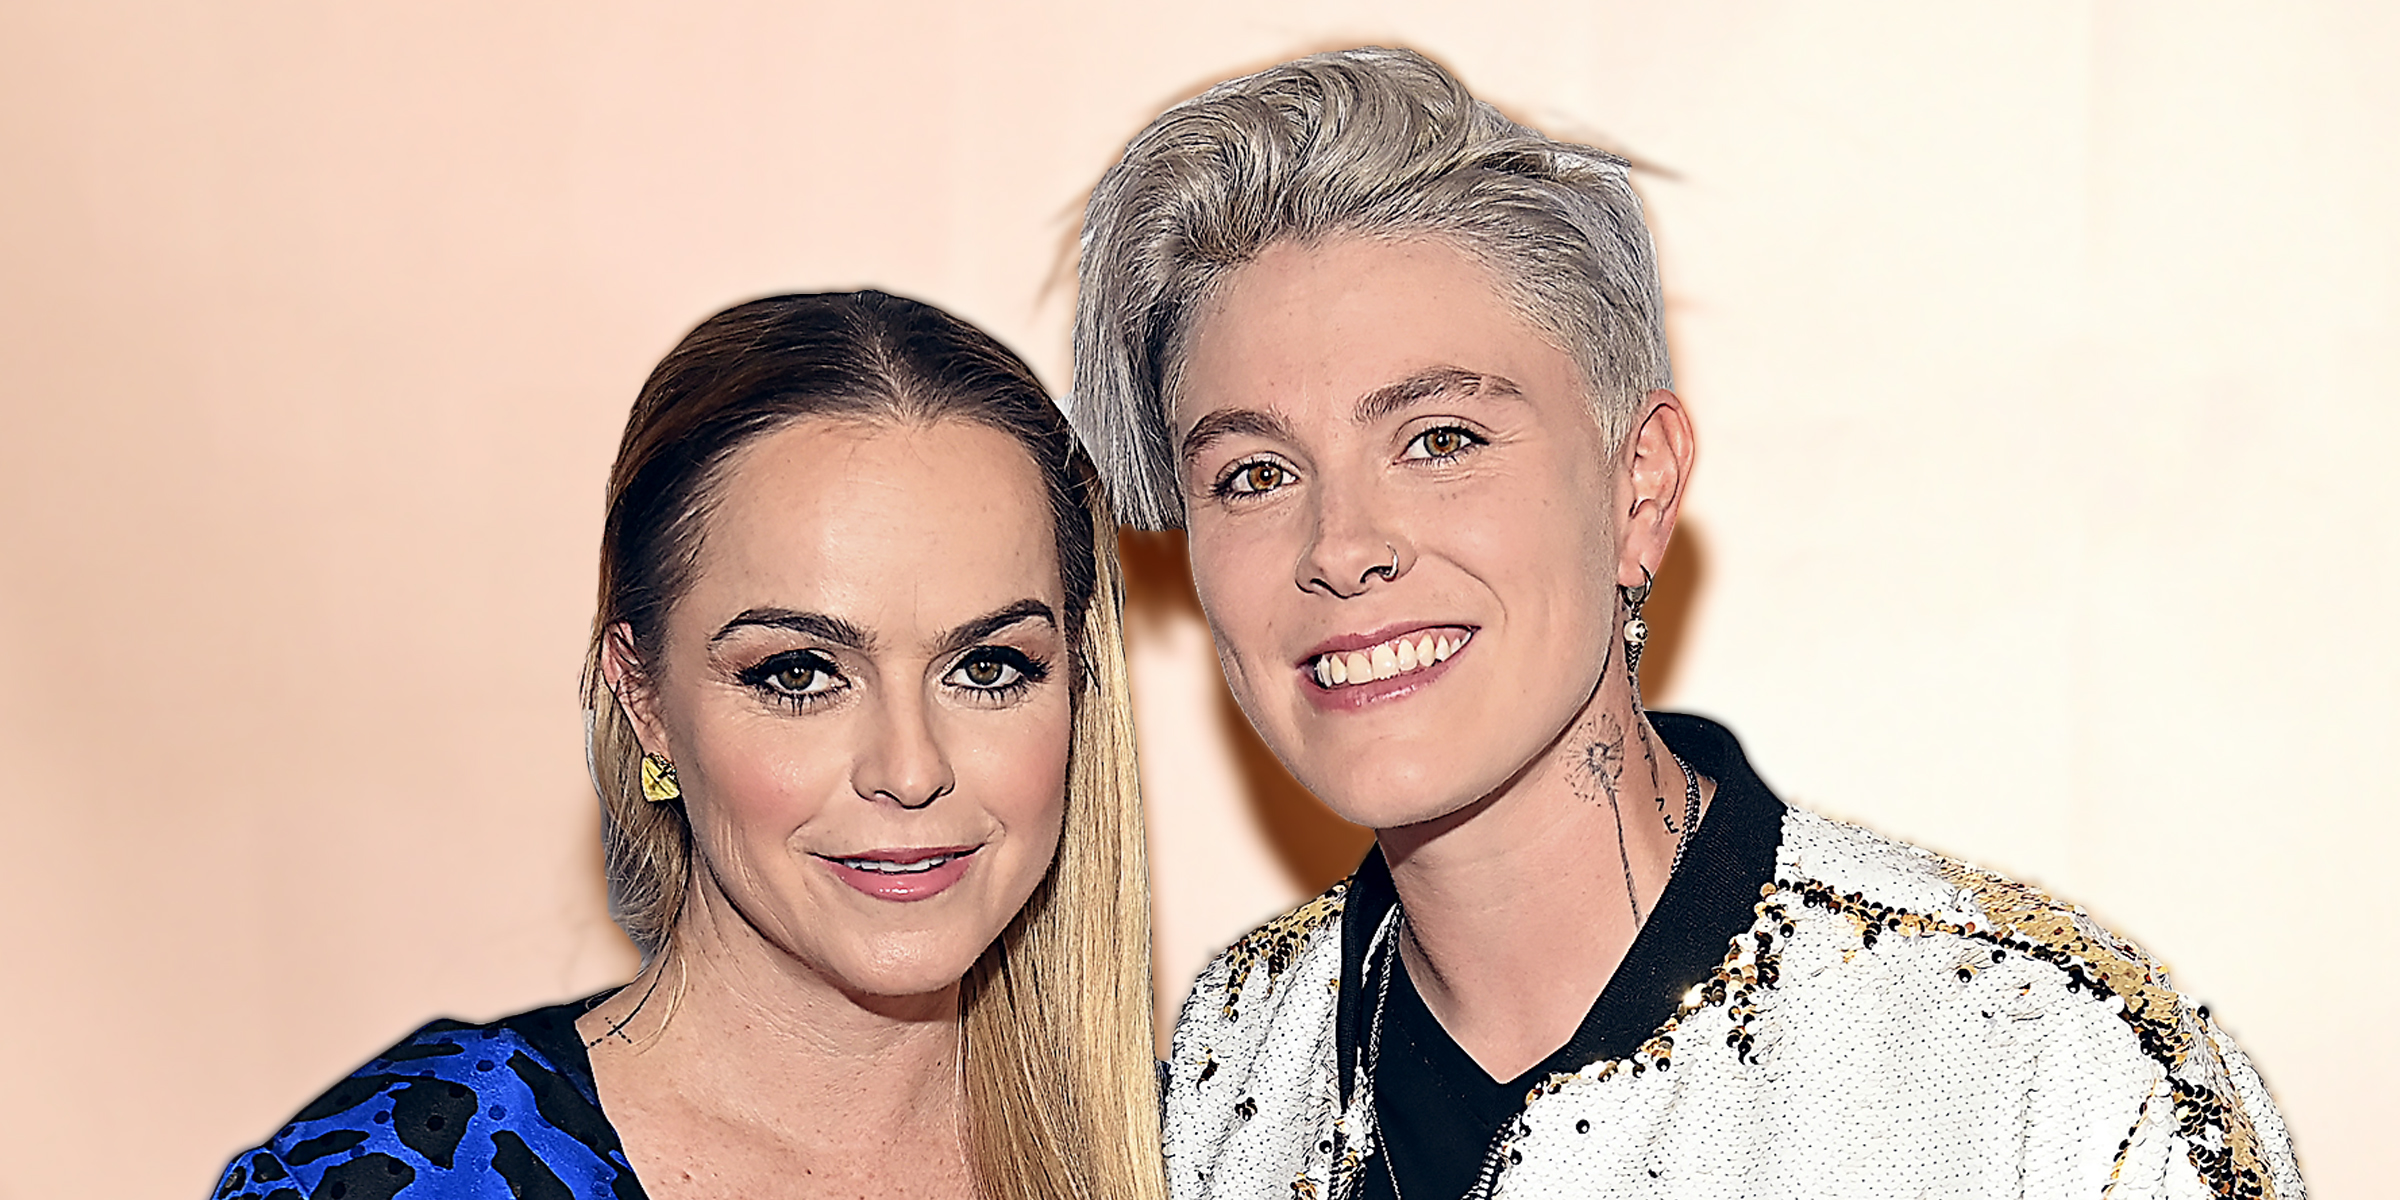 Taryn Manning and Anne Cline | Source: Getty Images